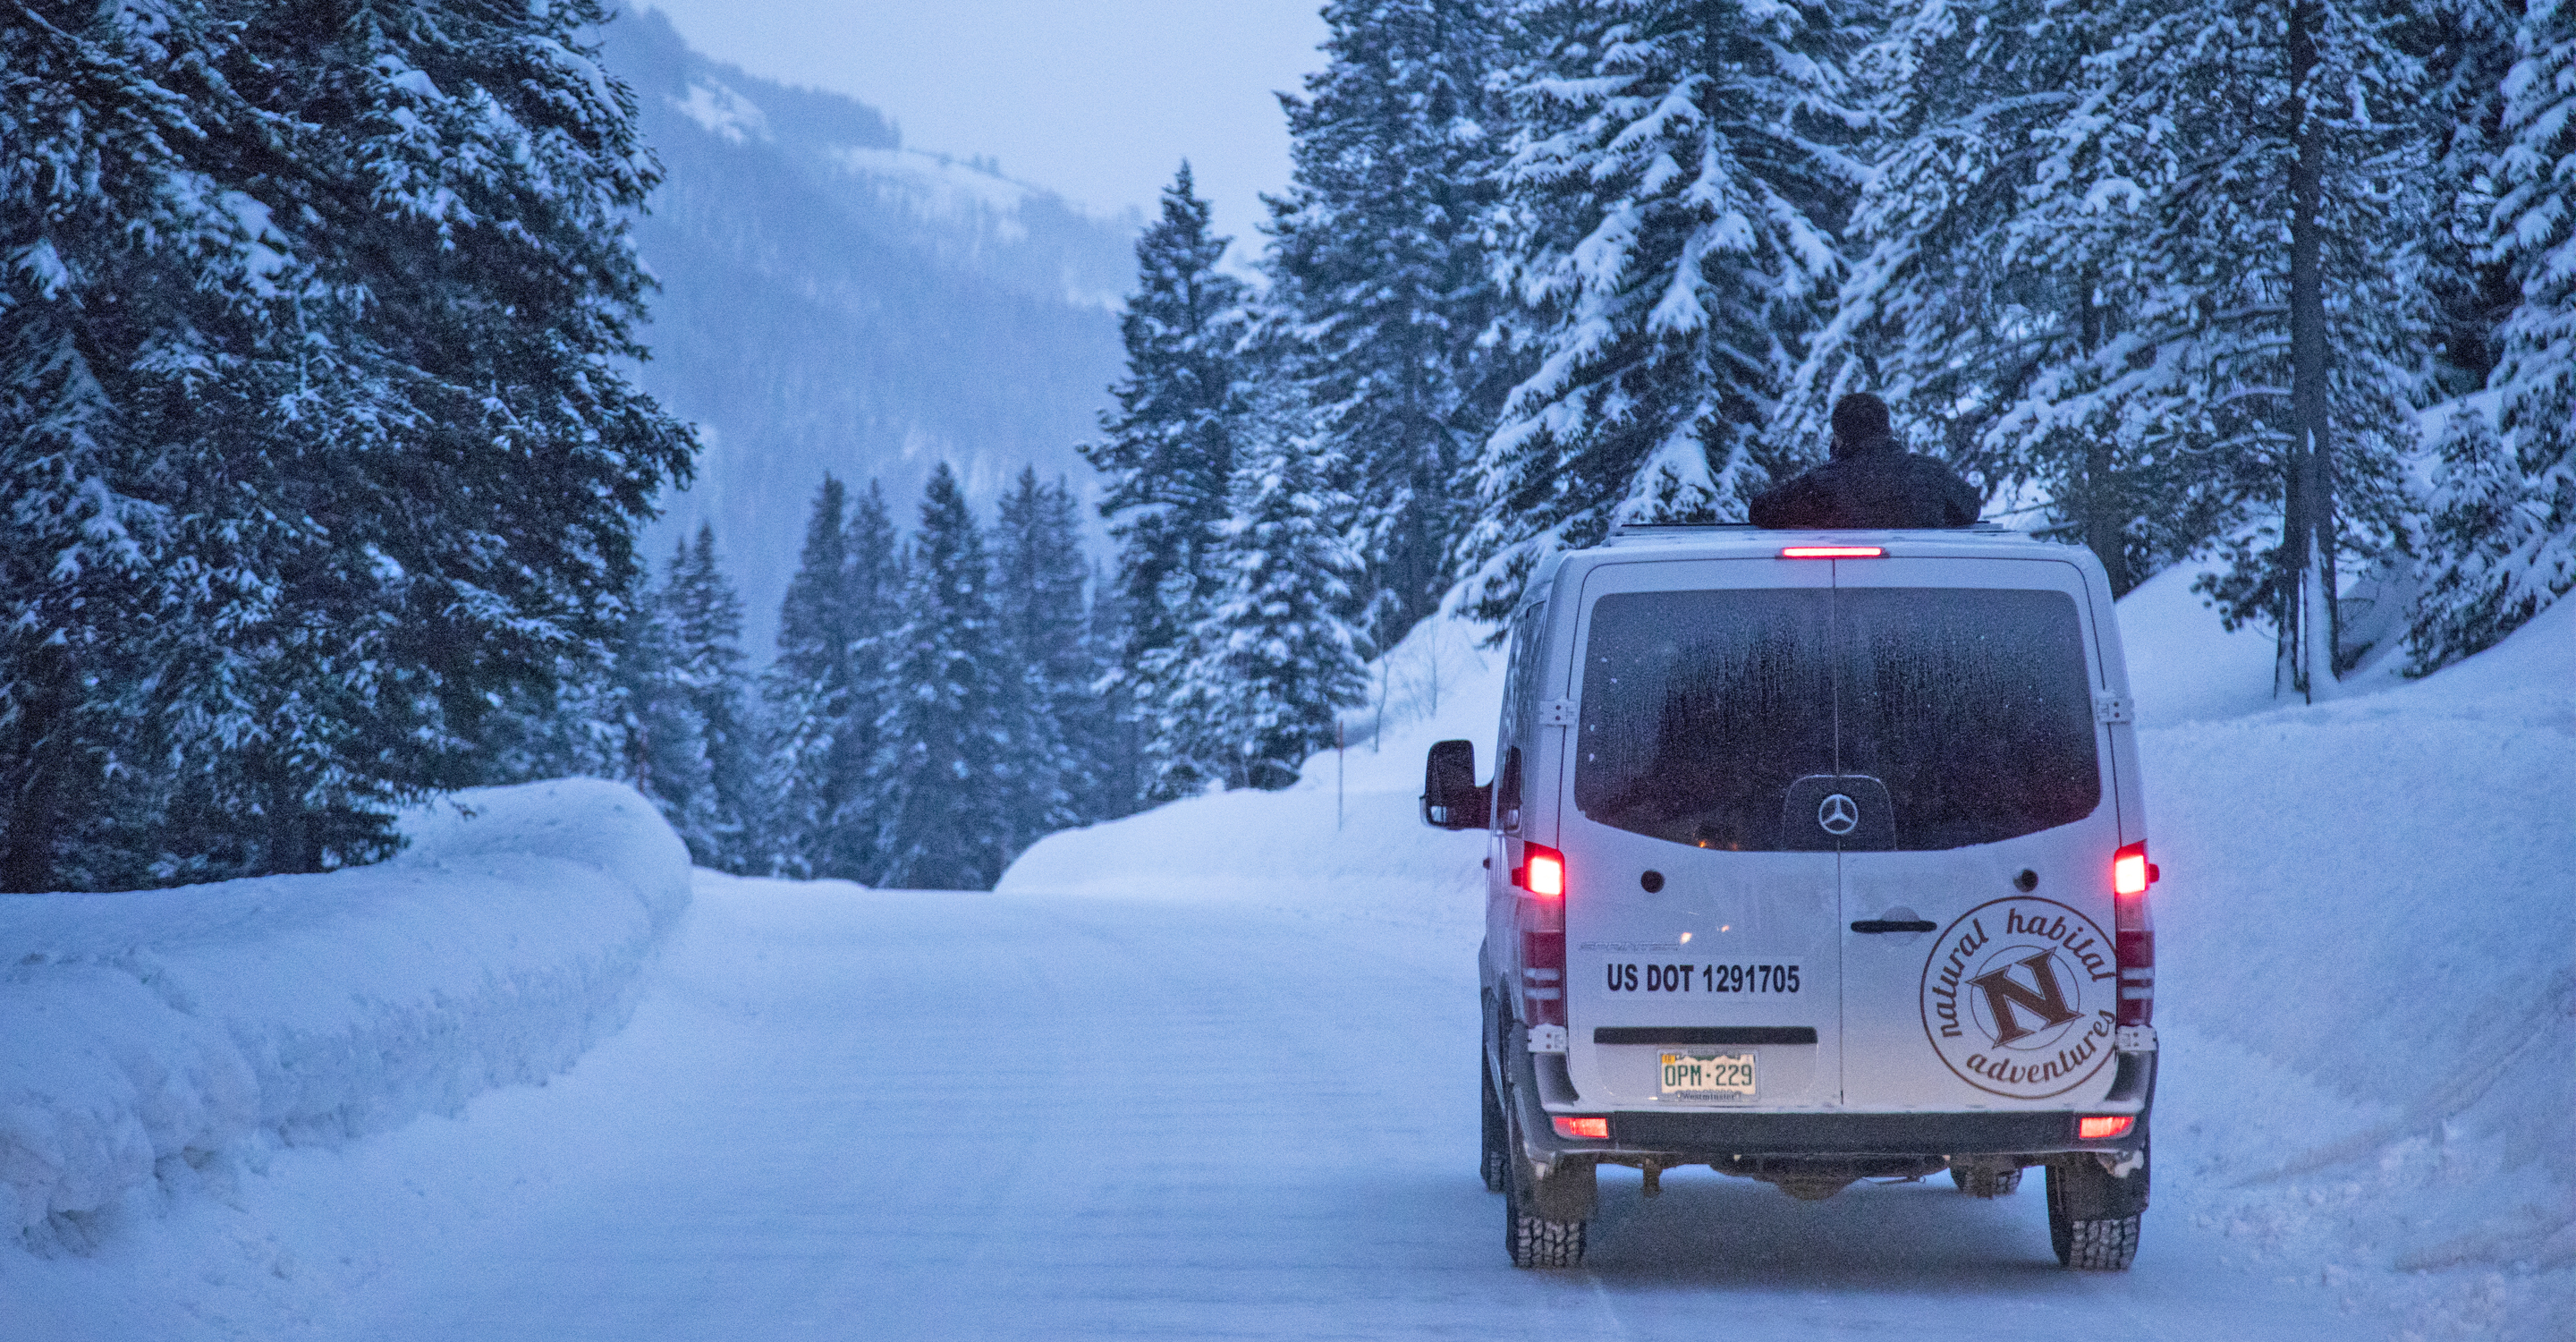 A Natural Habitat Adventures Sprinter parks along a snowy road in Yellowstone National Park, United States